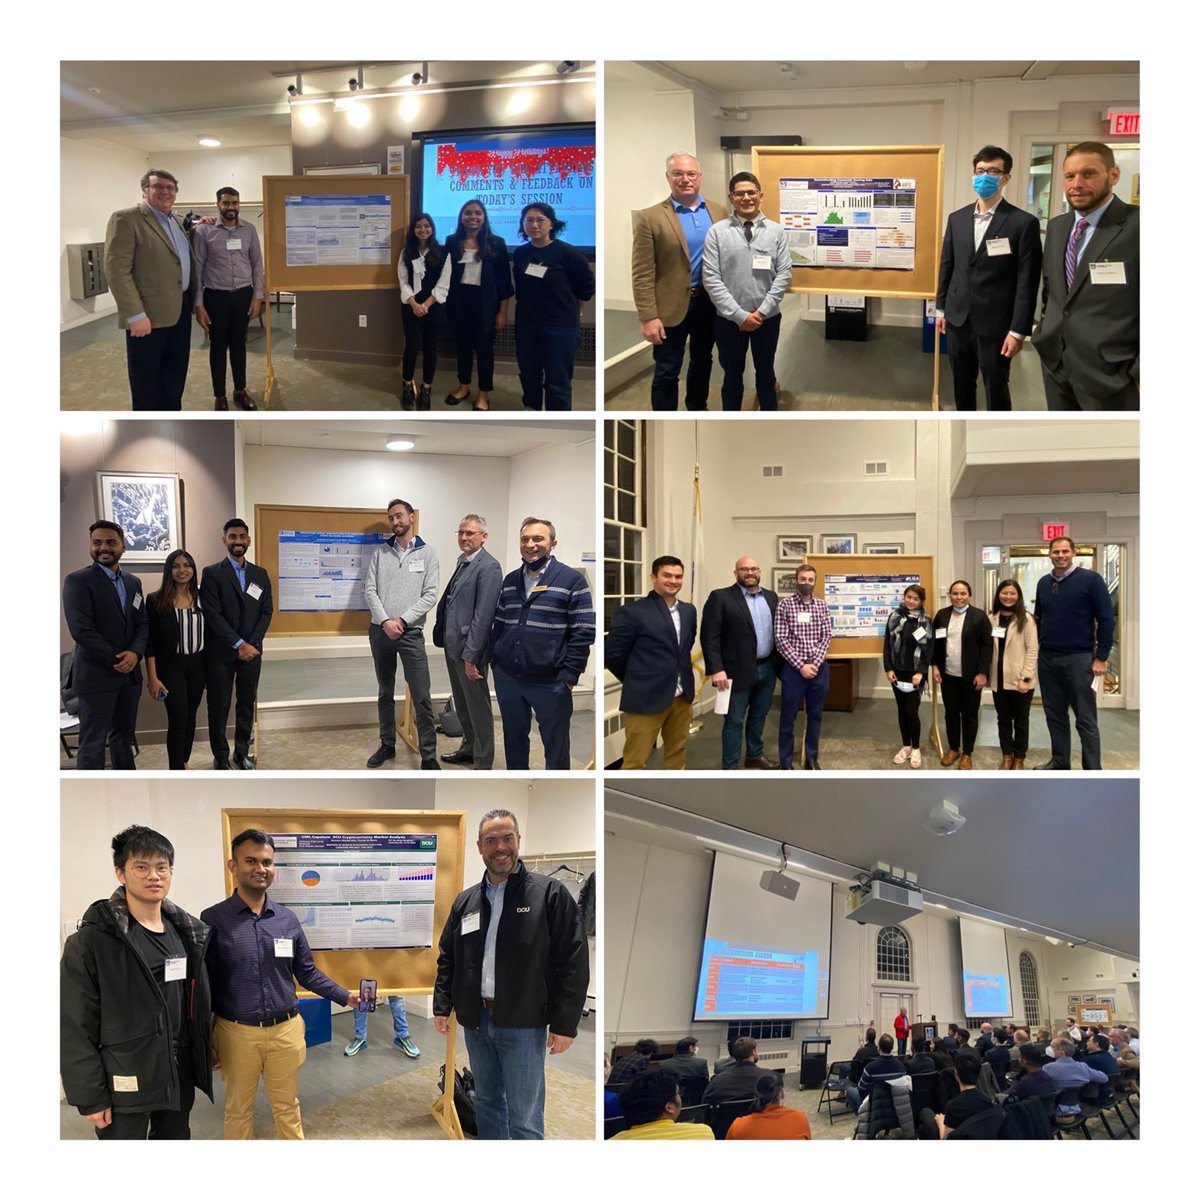 Thanks to our 1st class #corporate #sponsors of our ever-growing M.S. in #Business #Analytics program - another round of amazing capstone projects! LGA LLP, DCU, DELL EMC, Analog Devices, MFS Investement Mgmt @lgacpa, @DCUcreditunion, @dell emc @ADI_News, @followMFS @ManningUML